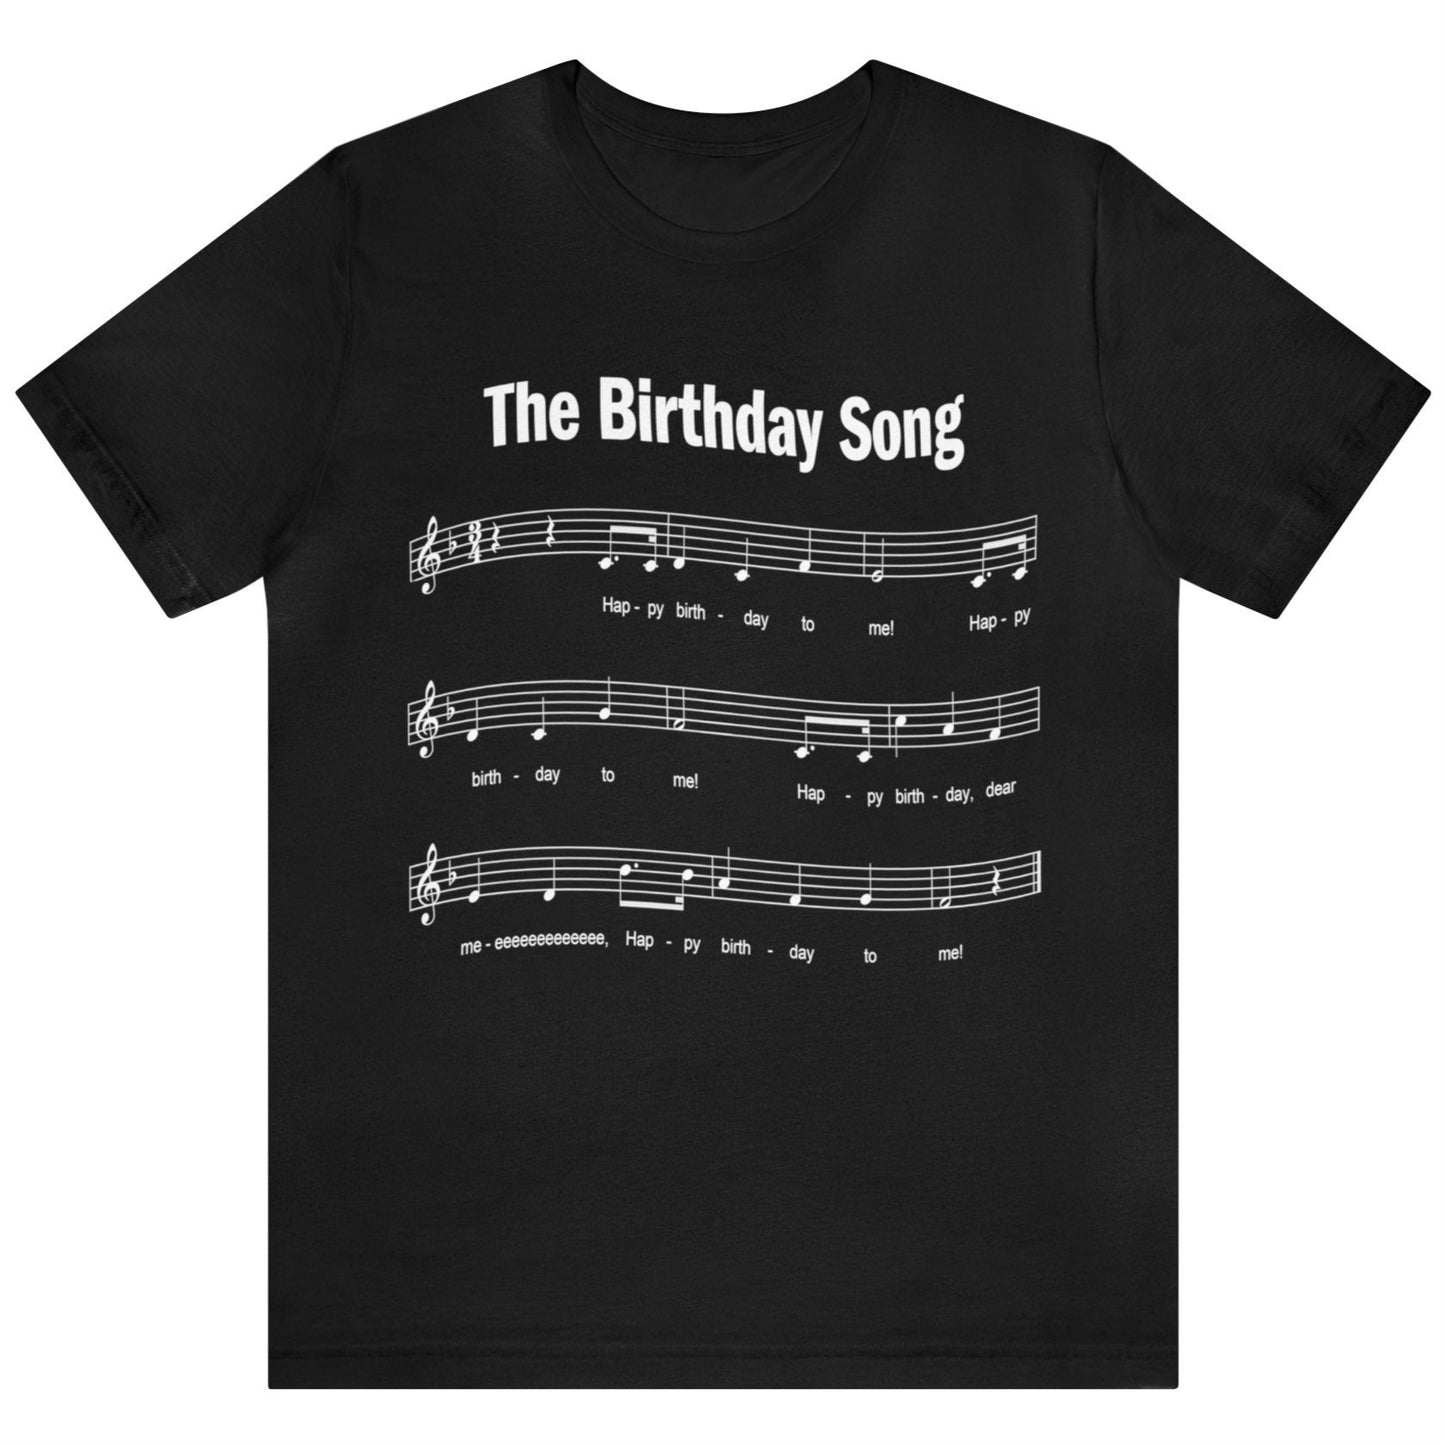 80th Birthday Gift T-shirt, Birthday Song EIGHT OH! 2-sided, Unisex Bella+Canvas 3001 T-shirt, Dark Colors, Funny Shirt for Surprise Parties